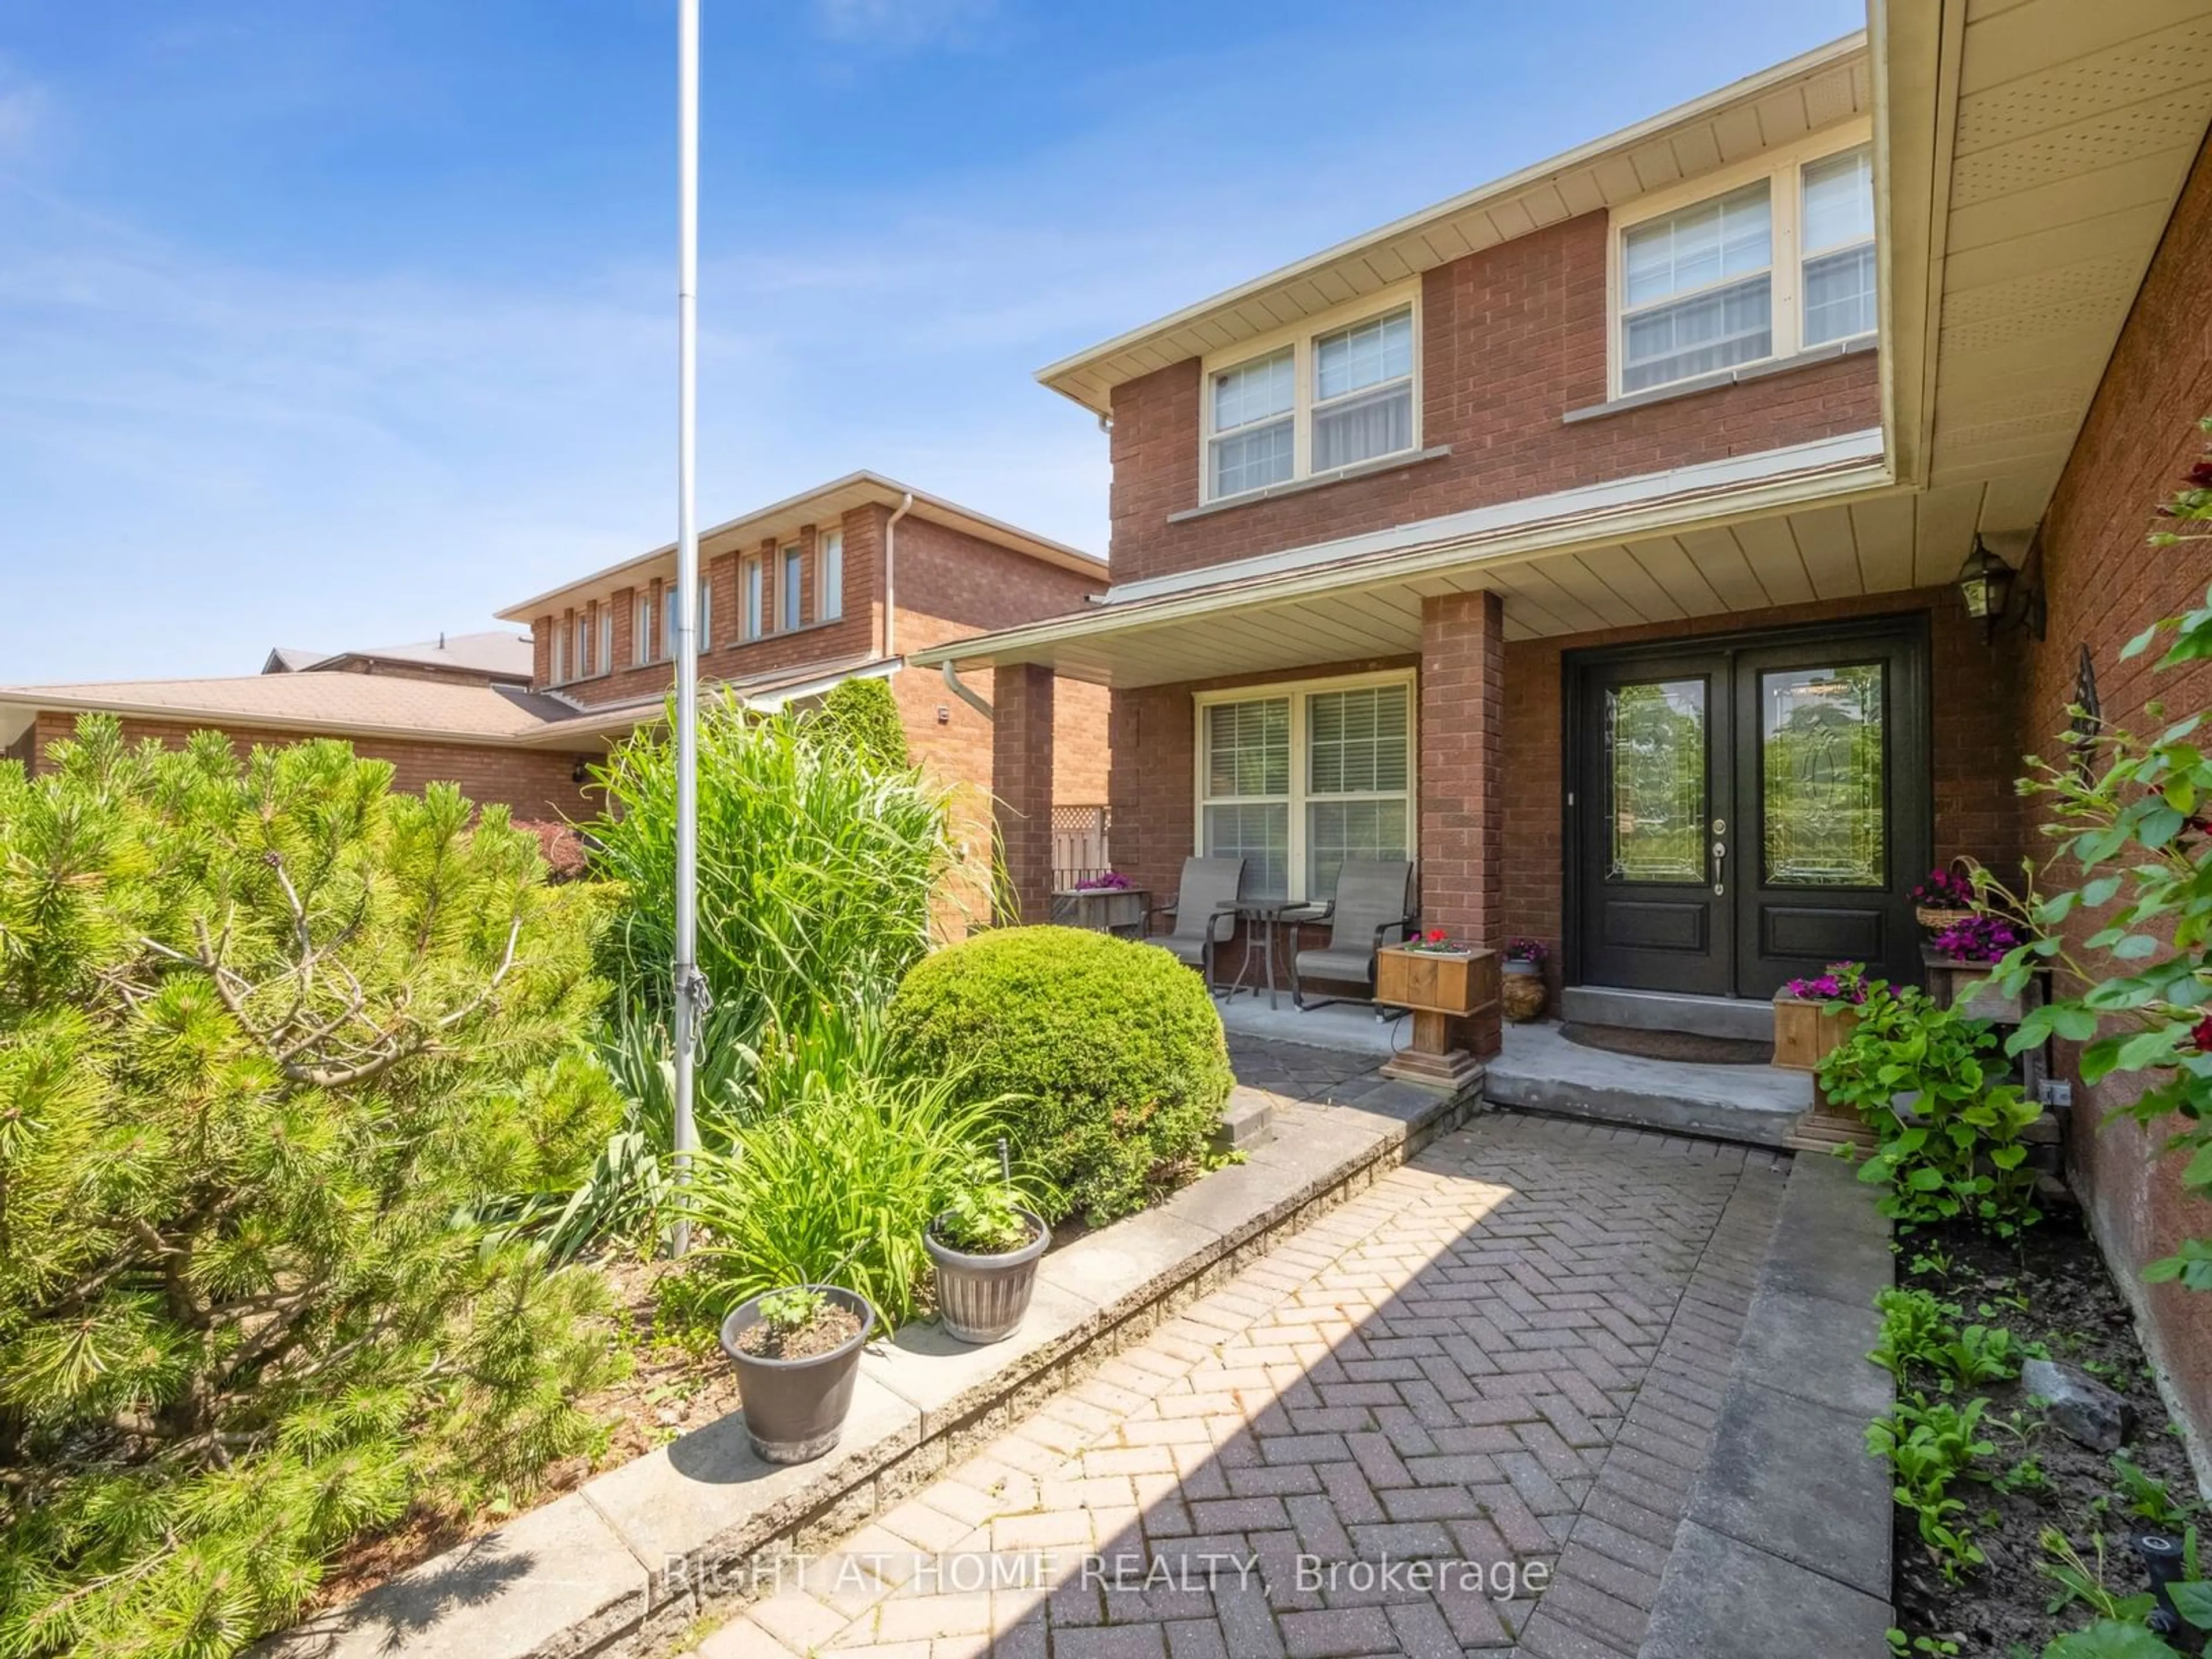 Home with brick exterior material for 588 Millard St, Whitchurch-Stouffville Ontario L4A 7Y4